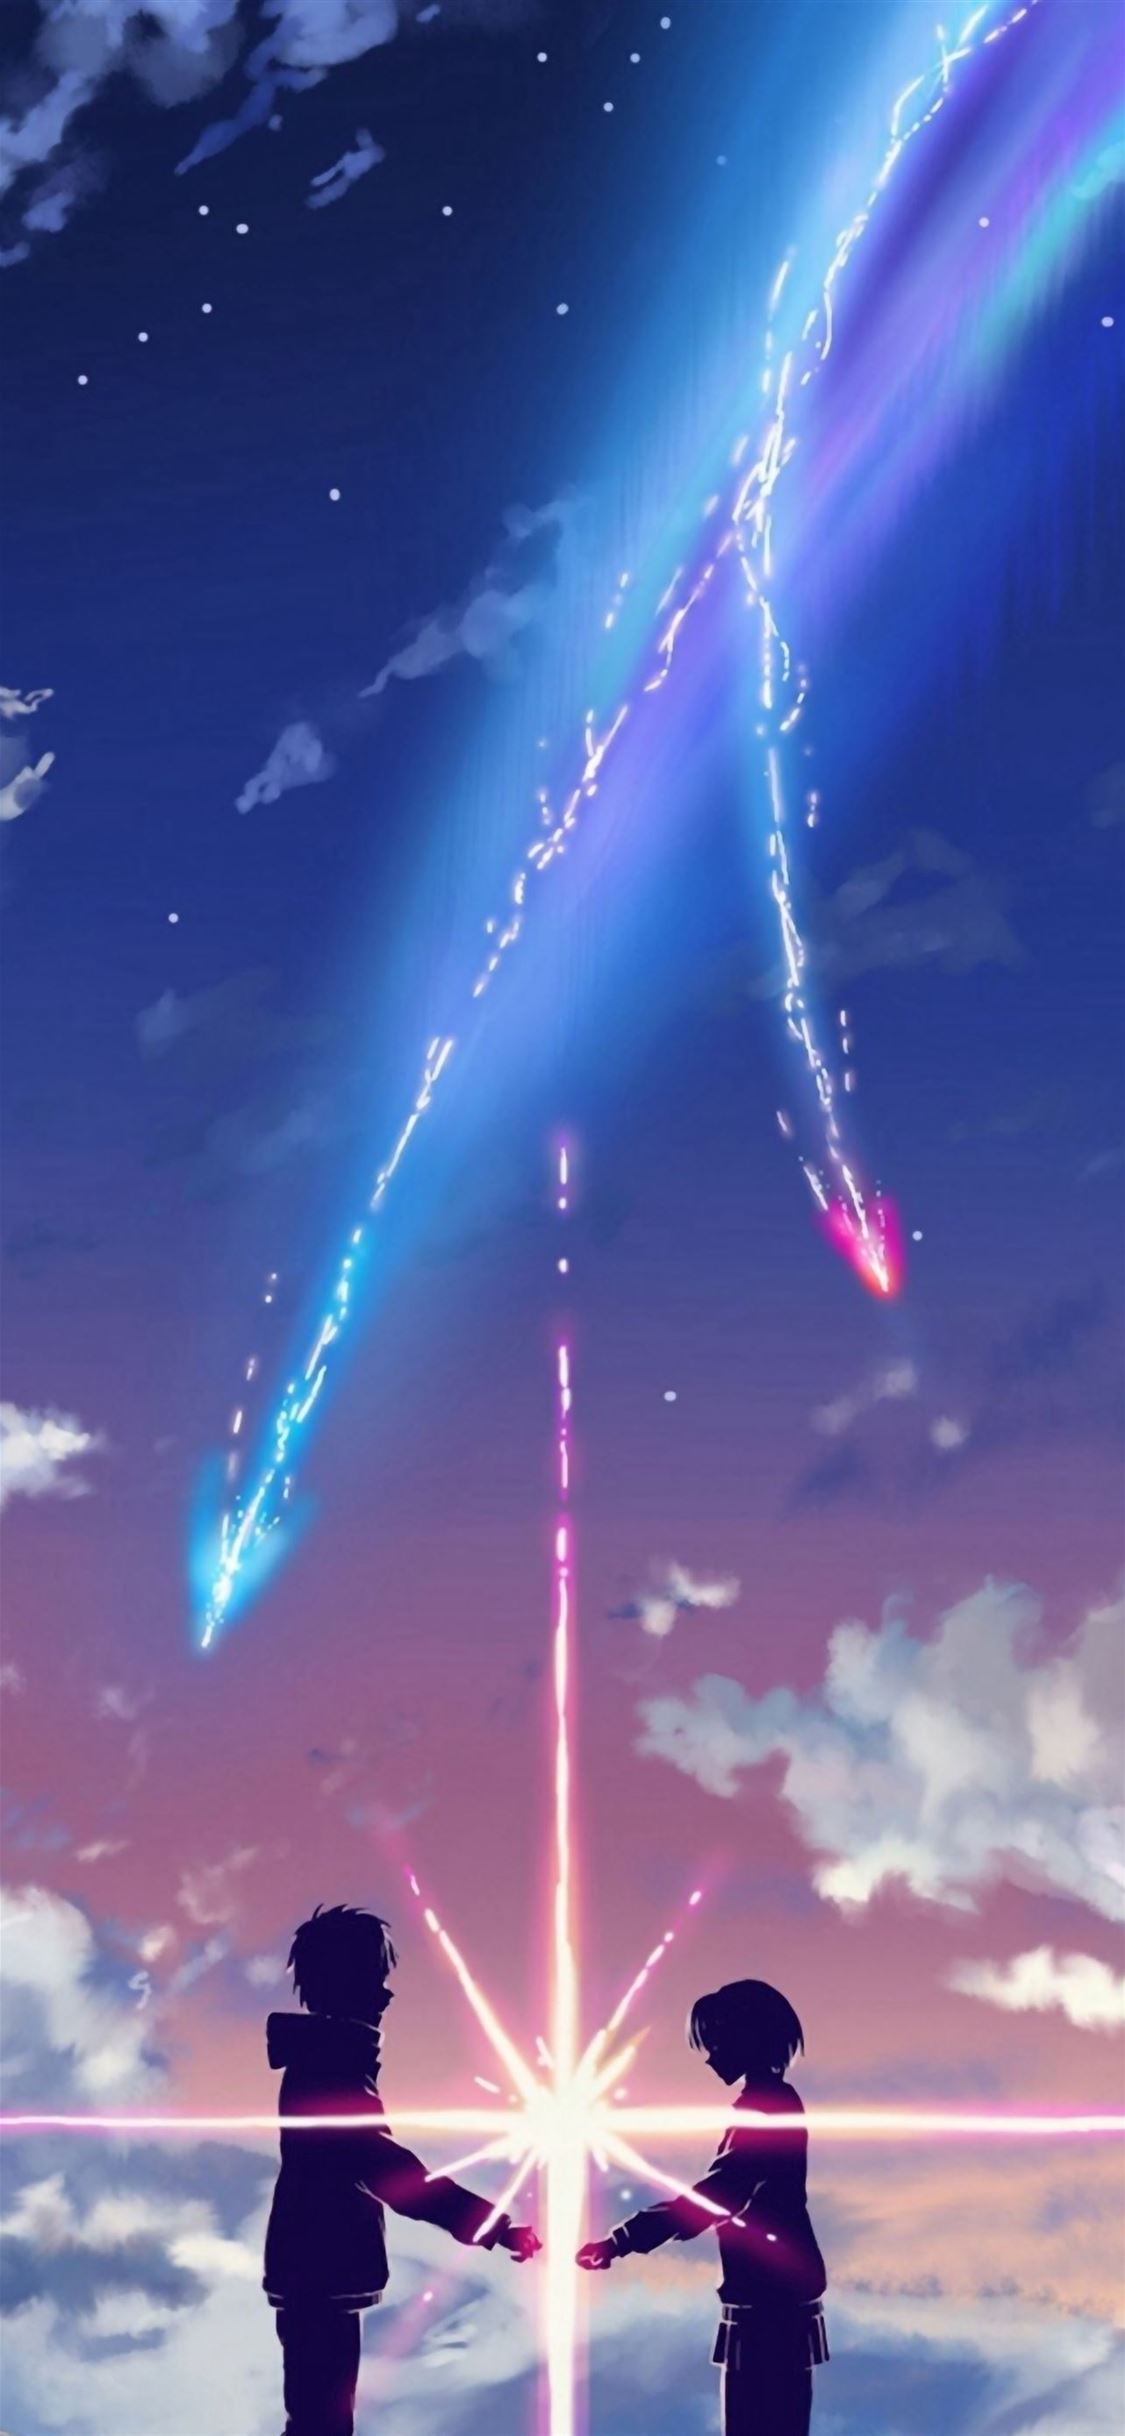 Your Name Movie Film Poster Bright Sparkle iPhone wallpaper 